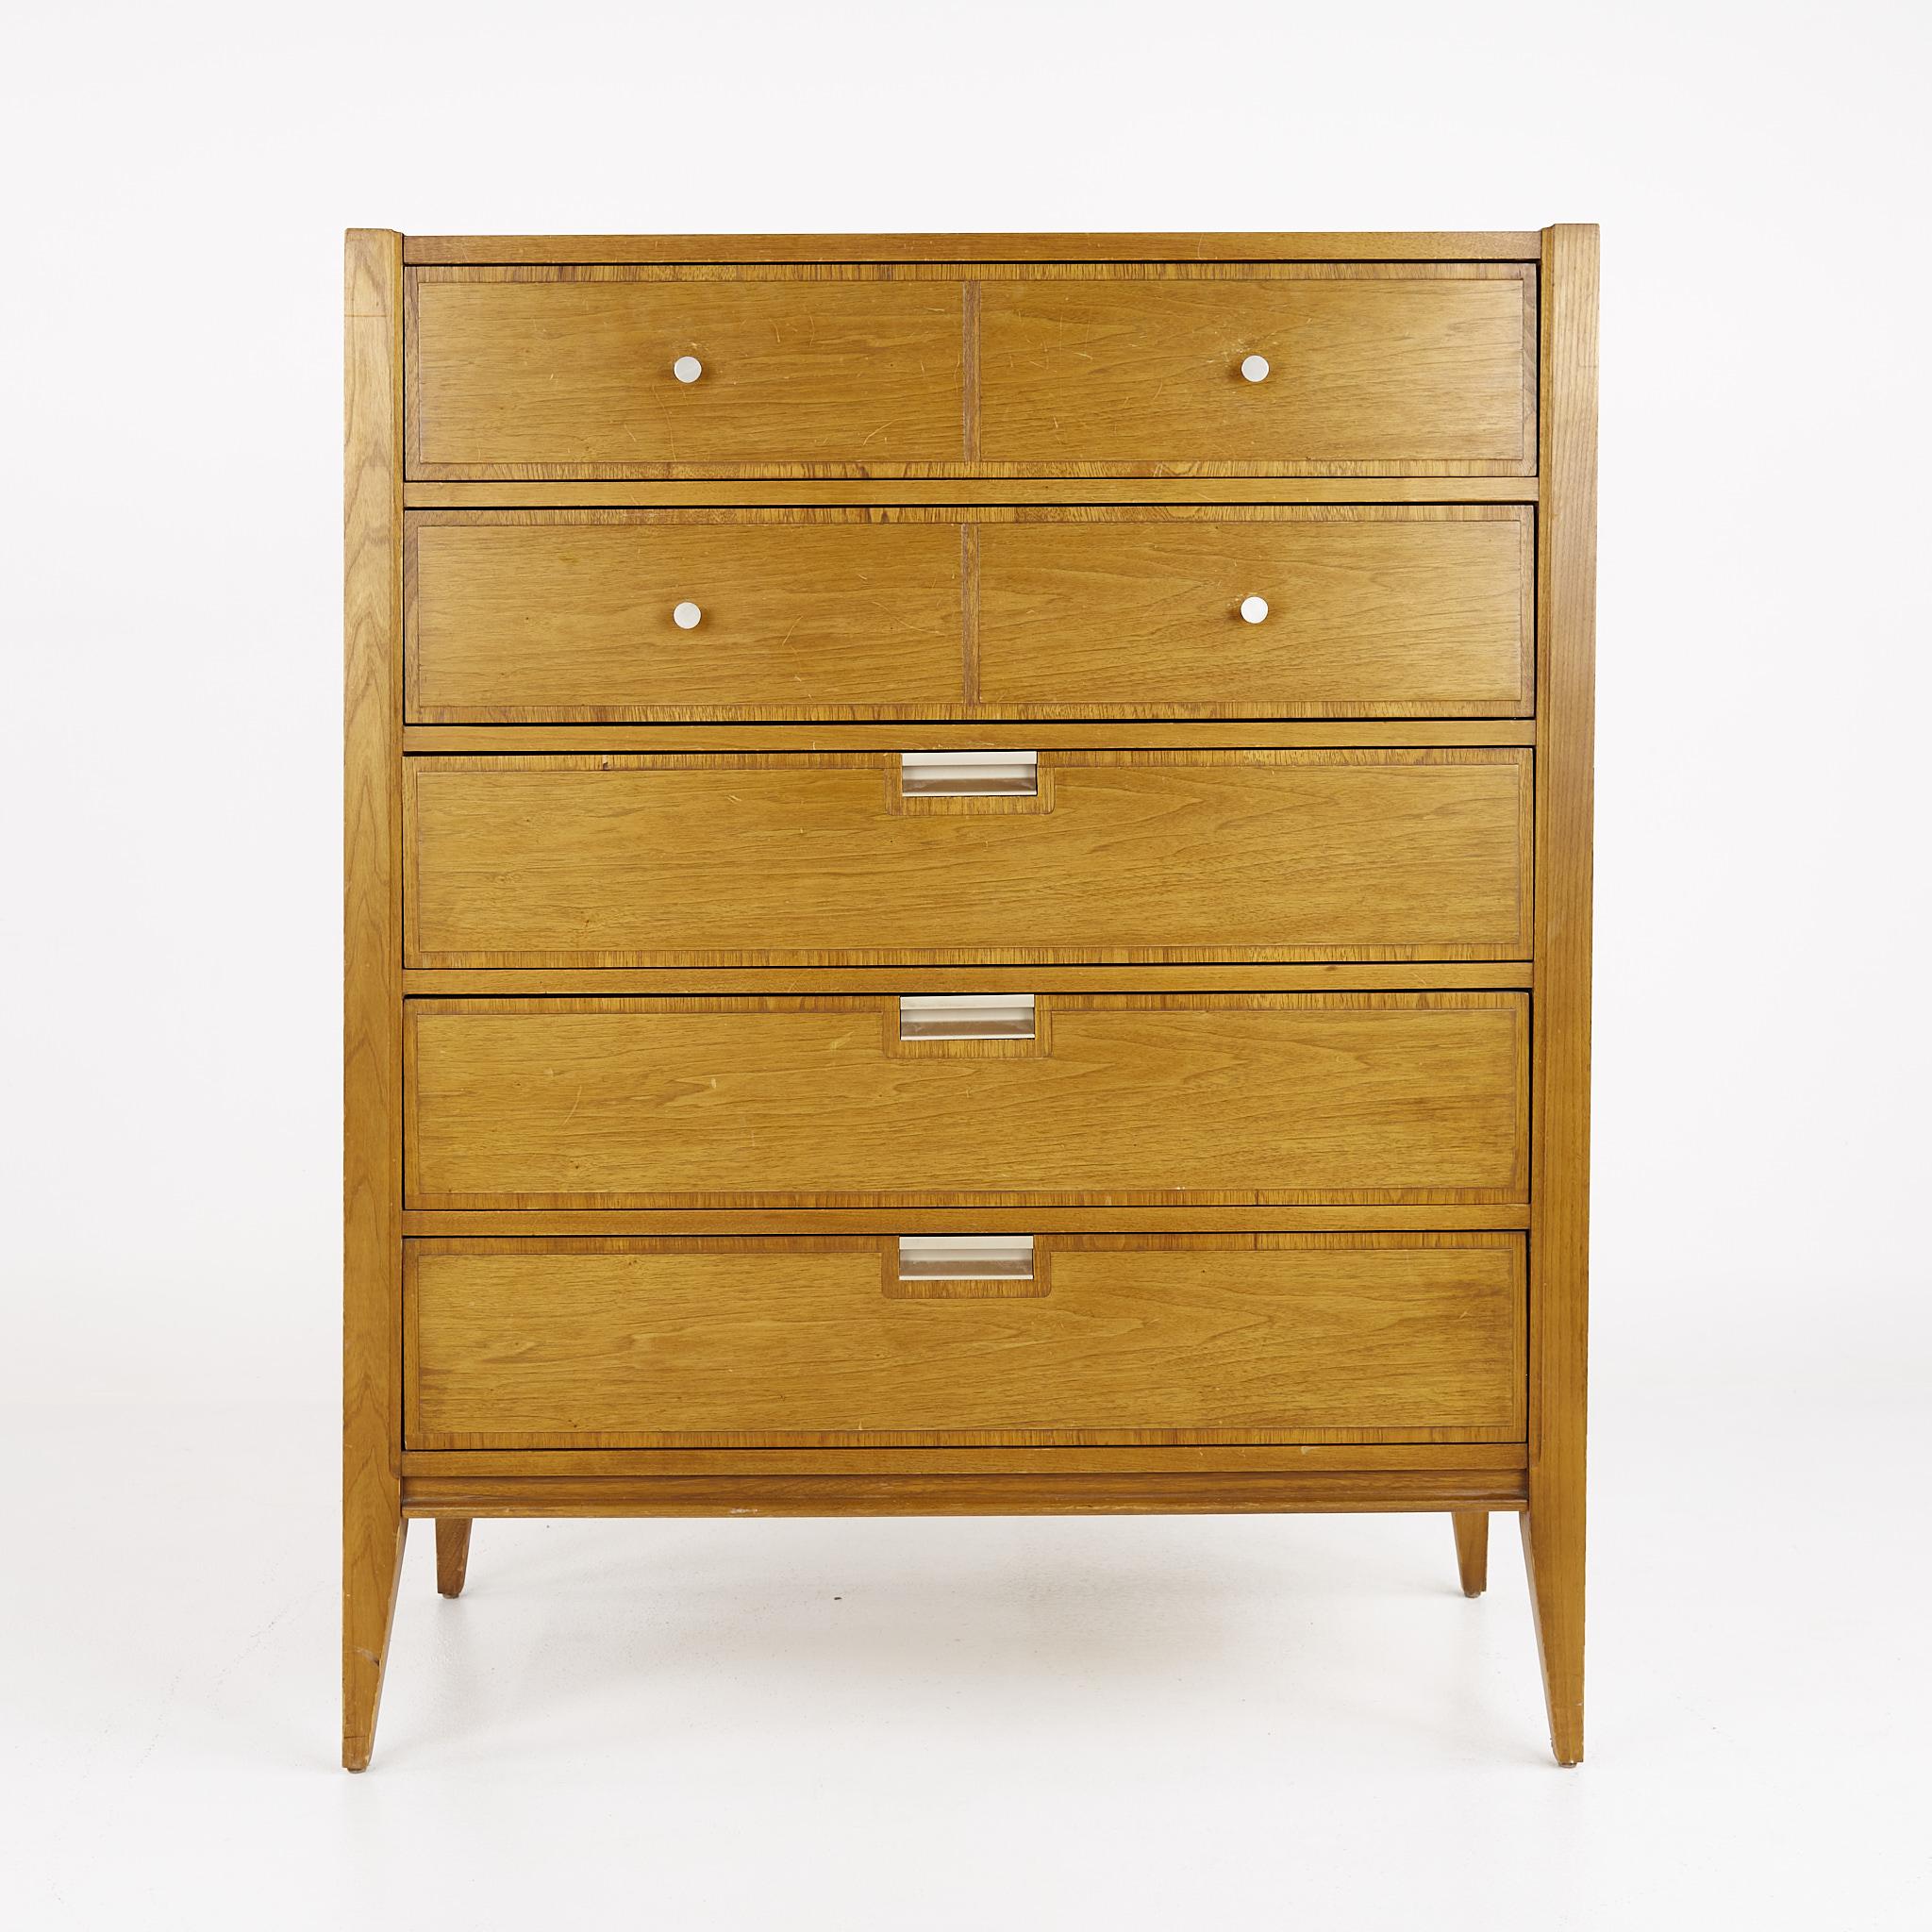 Basic Witz Mid Century Walnut 5 Drawer Highboy Dresser

This dresser measures: 36 wide x 18 deep x 44.5 inches high

?All pieces of furniture can be had in what we call restored vintage condition. That means the piece is restored upon purchase so